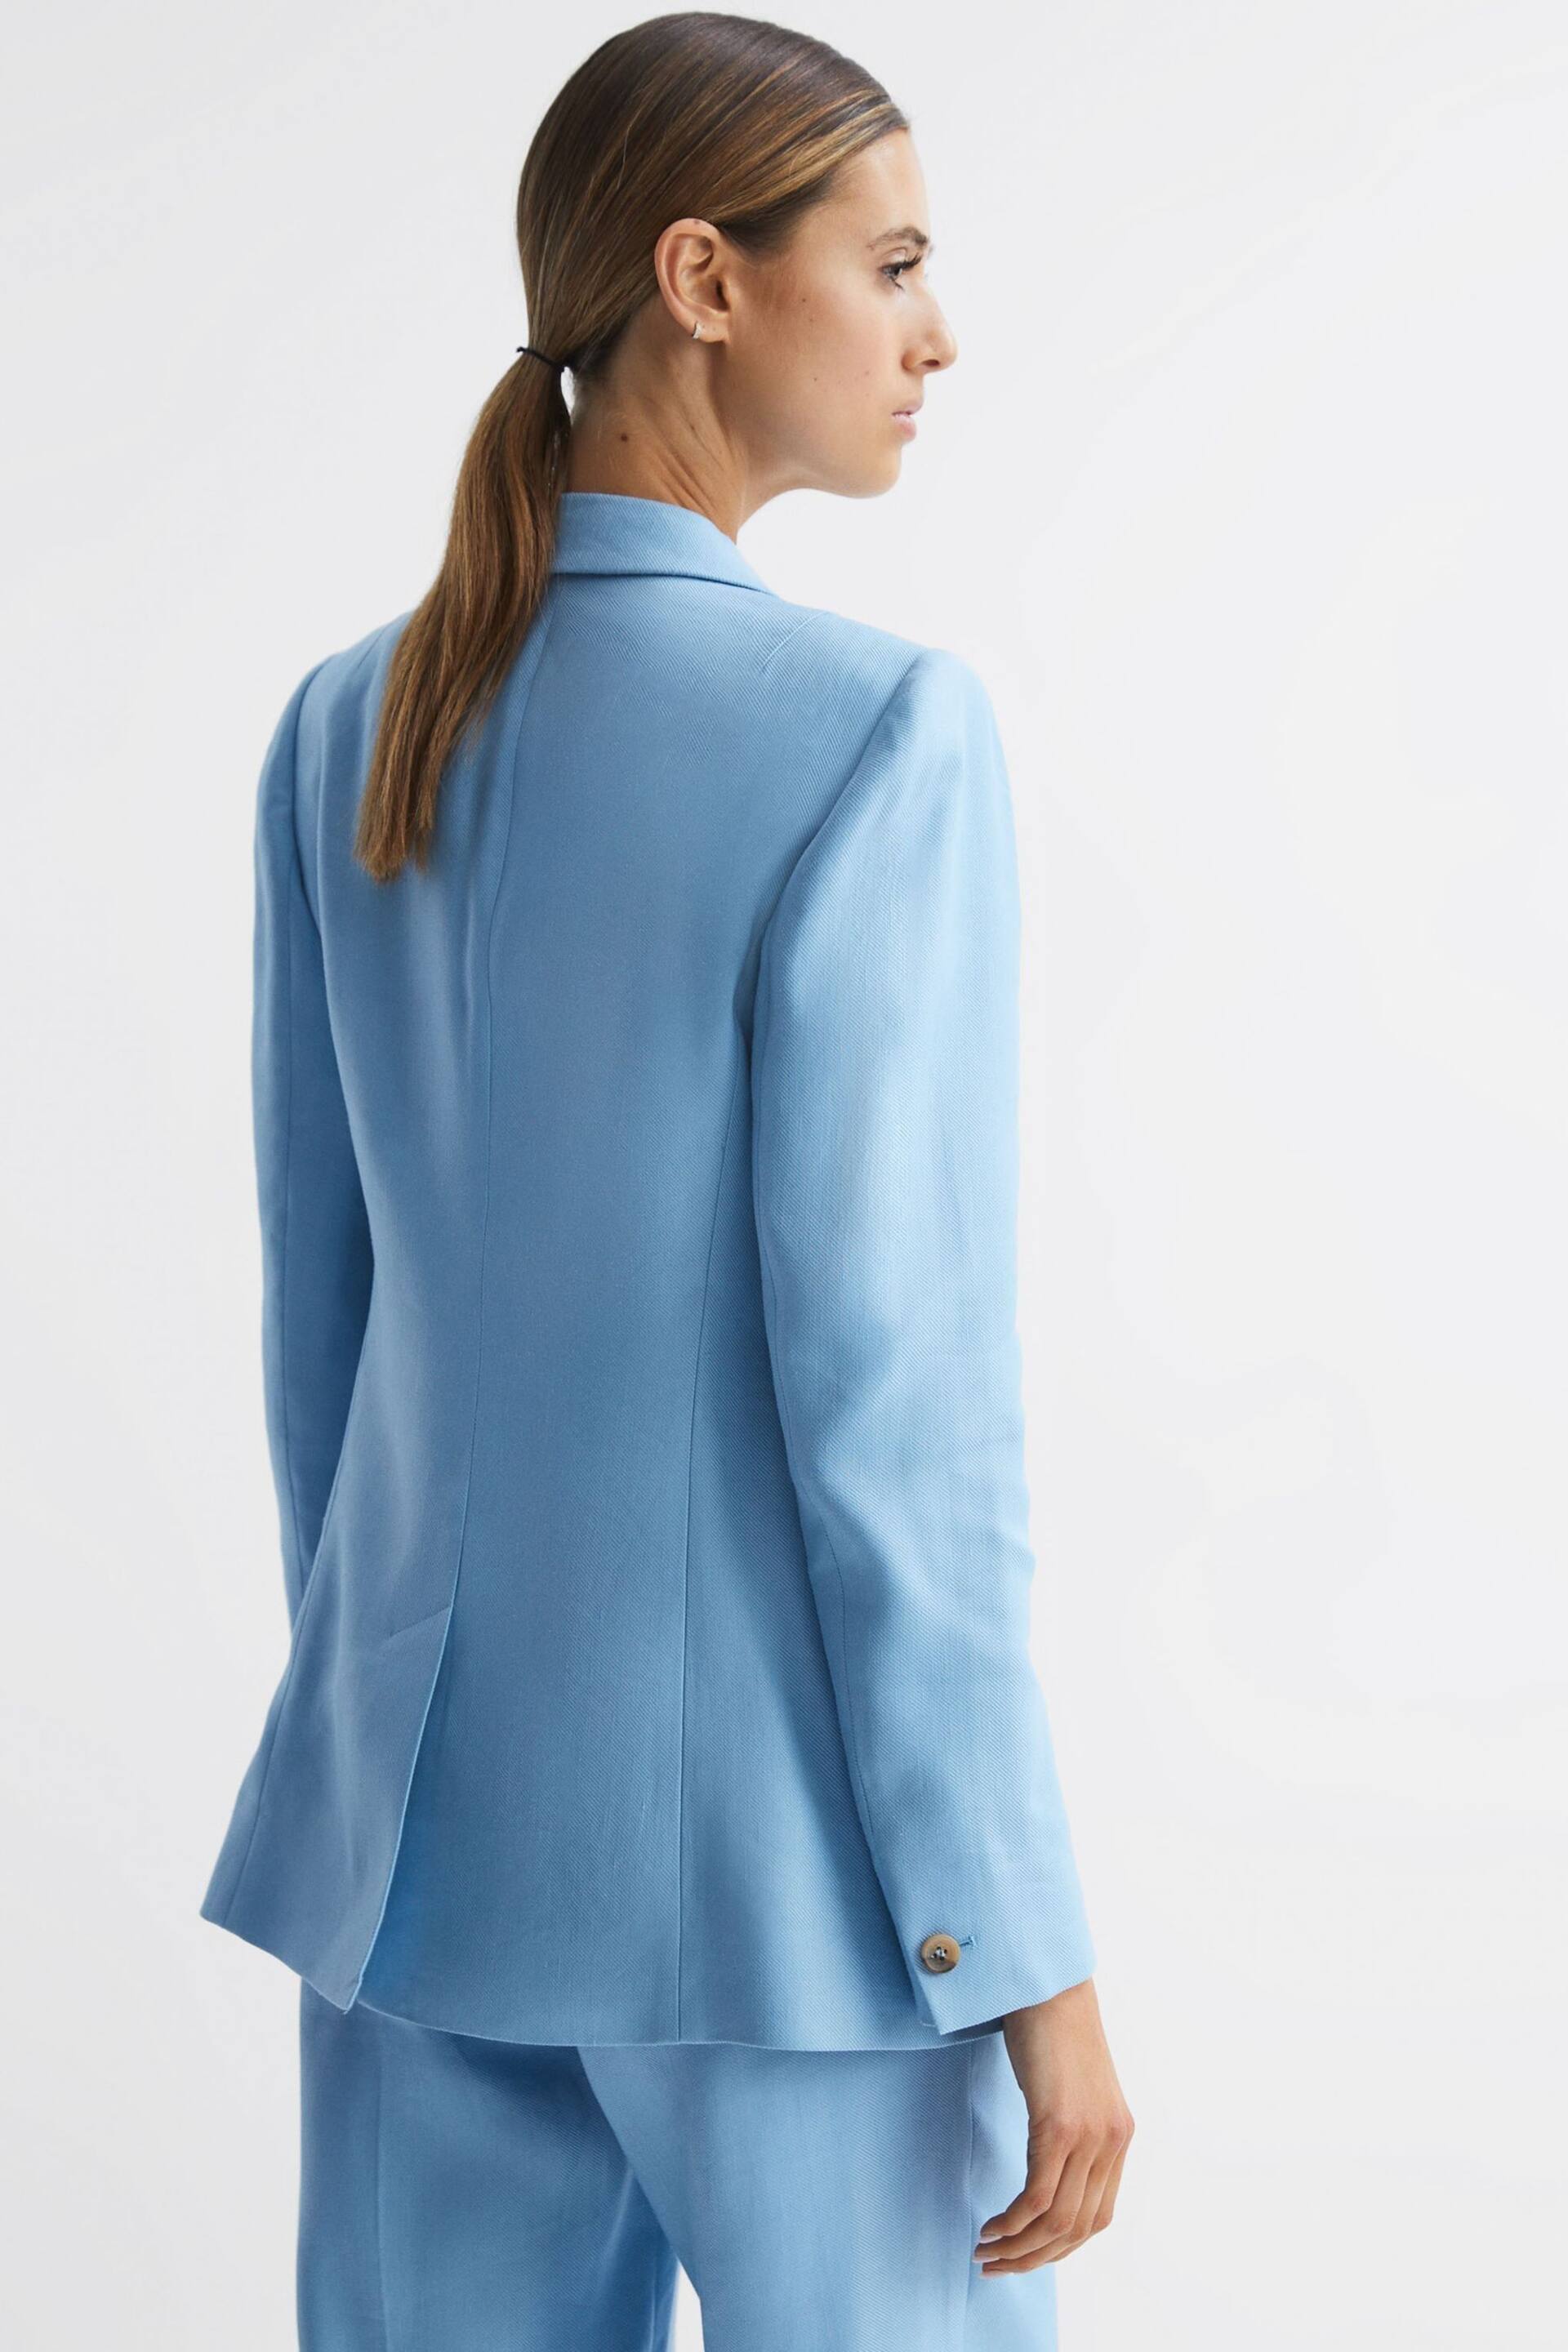 Reiss Blue Hollie Double Breasted Linen Blazer - Image 5 of 7